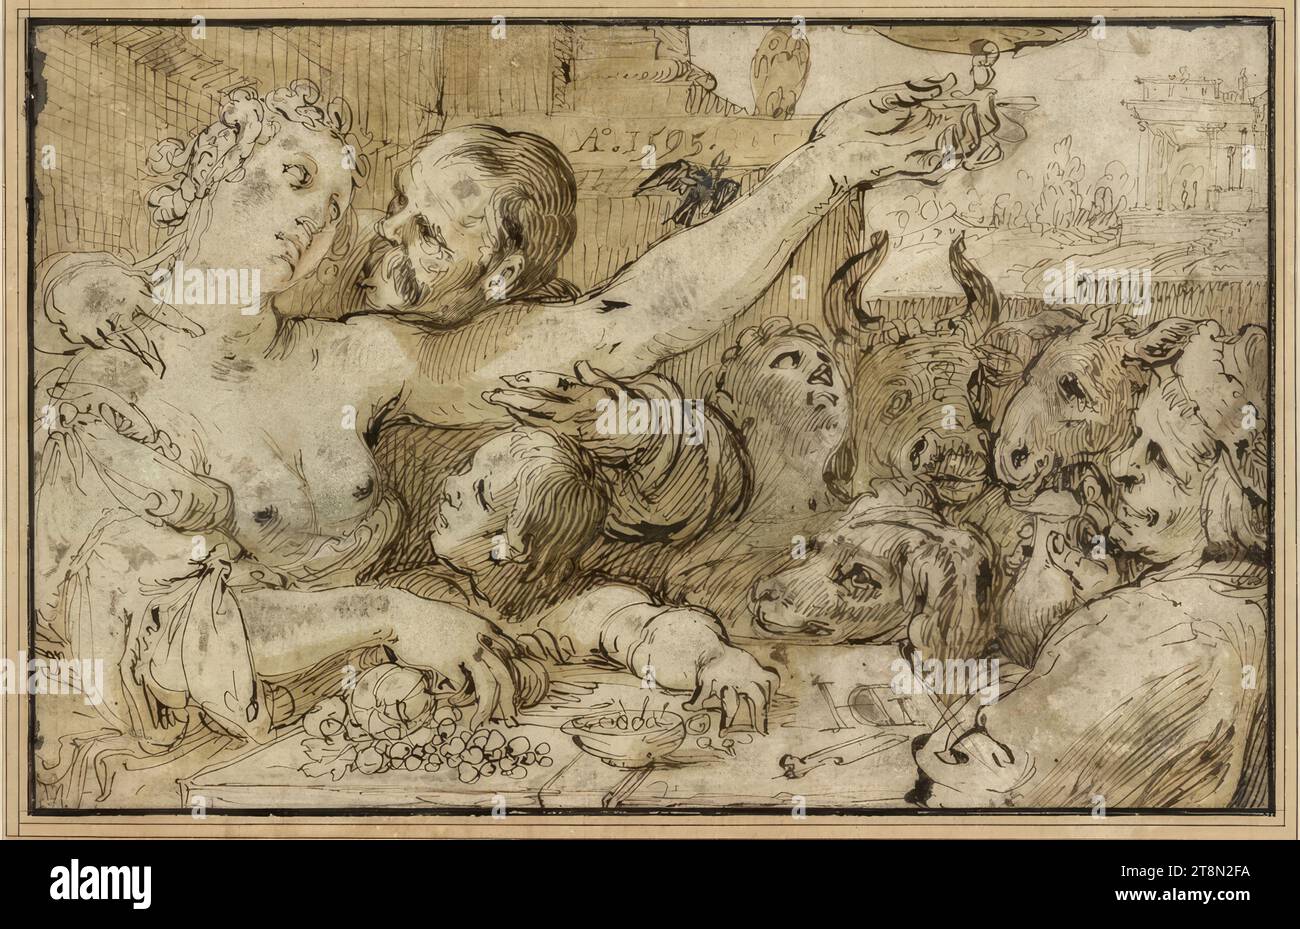 Allegorical depiction, Hendrick Goltzius (Bracht near Venlo 1558 - 1617 Haarlem), 1595, drawing, pen and ink in brown, washed, heightened with white, 19 x 29.6 cm, l. and Duke Albert of Saxe-Teschen Stock Photo